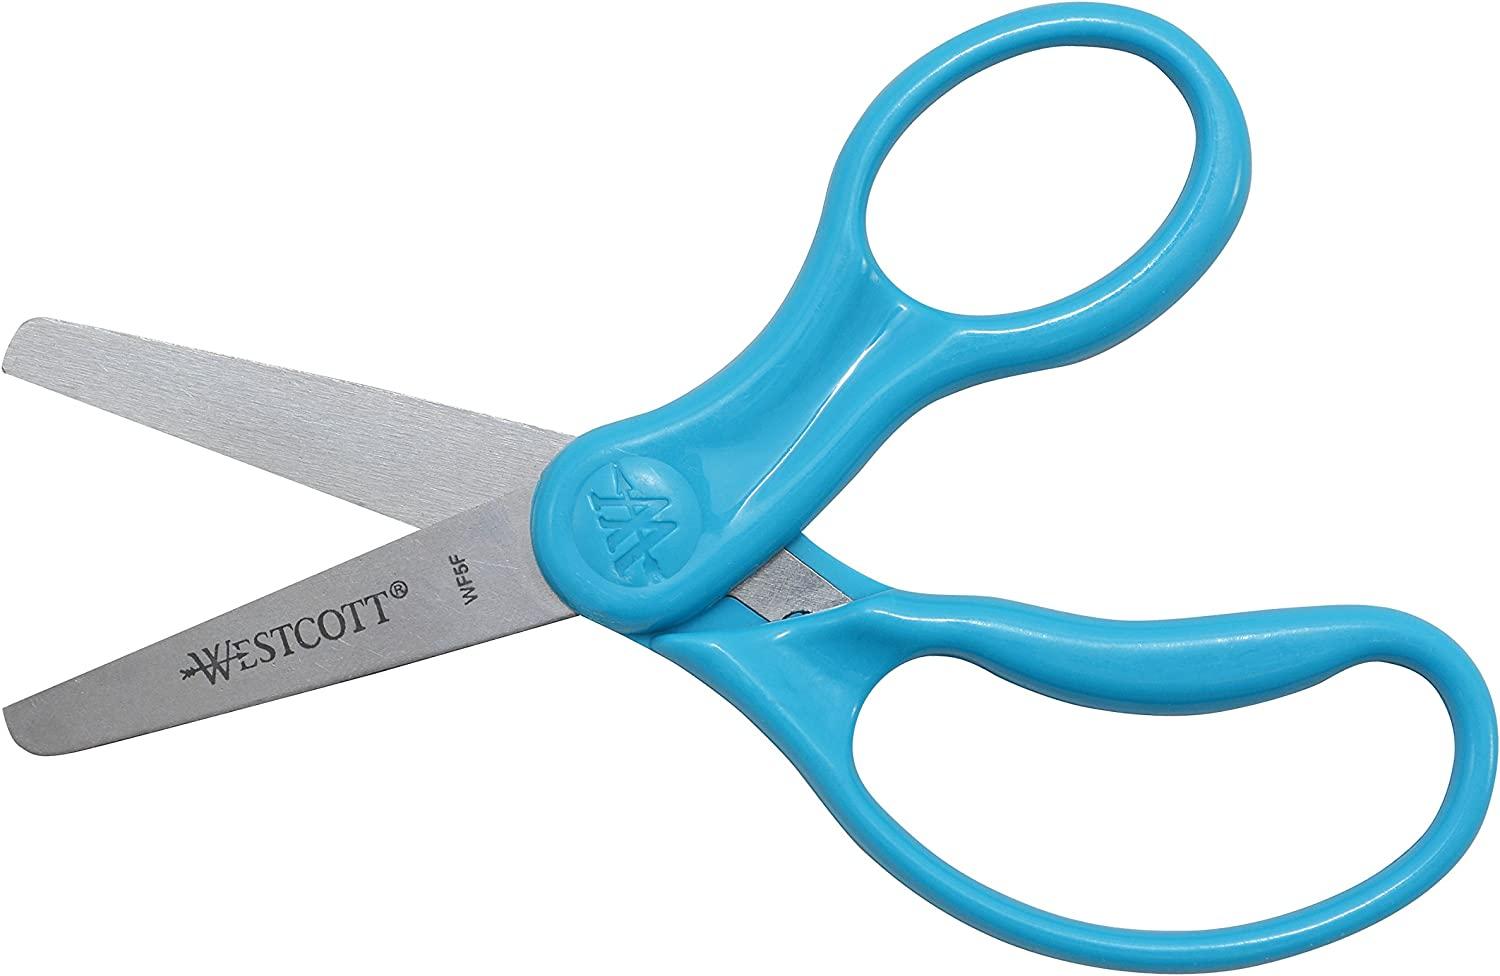 Kids/Student Scissors, Pointed Tip, 7 inch Long, 2.75 inch Cut Length, Assorted Straight Handles | Bundle of 2 Each